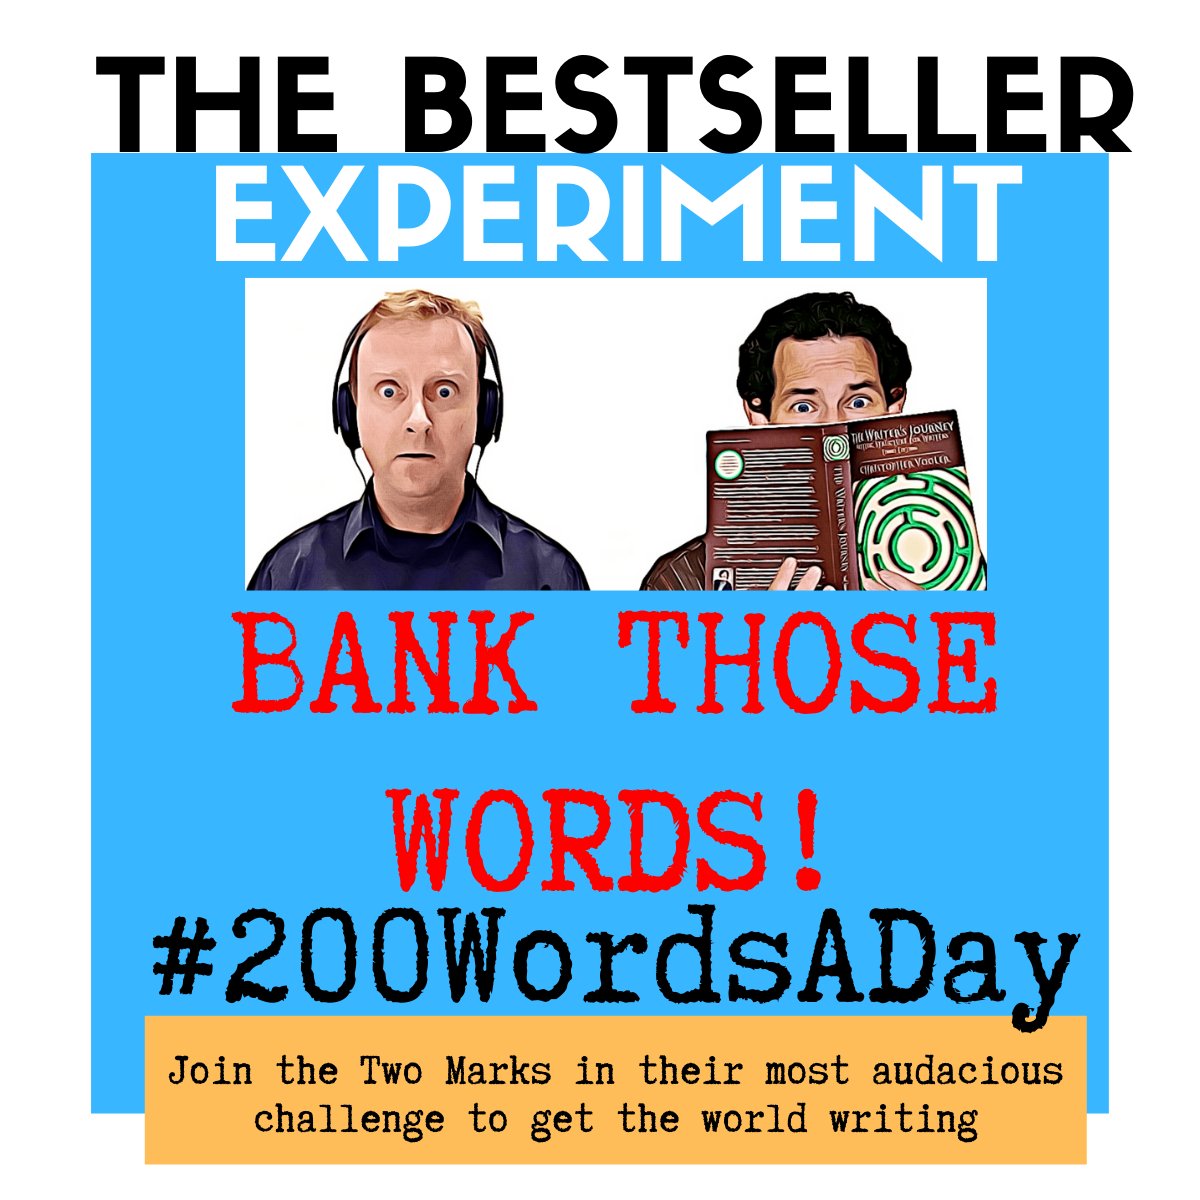 📢Want the writing habit of a lifetime? Sign up today to the FREE 200 Word A Day Challenge. #200WordsADay 200wordchallenge.com #BXP